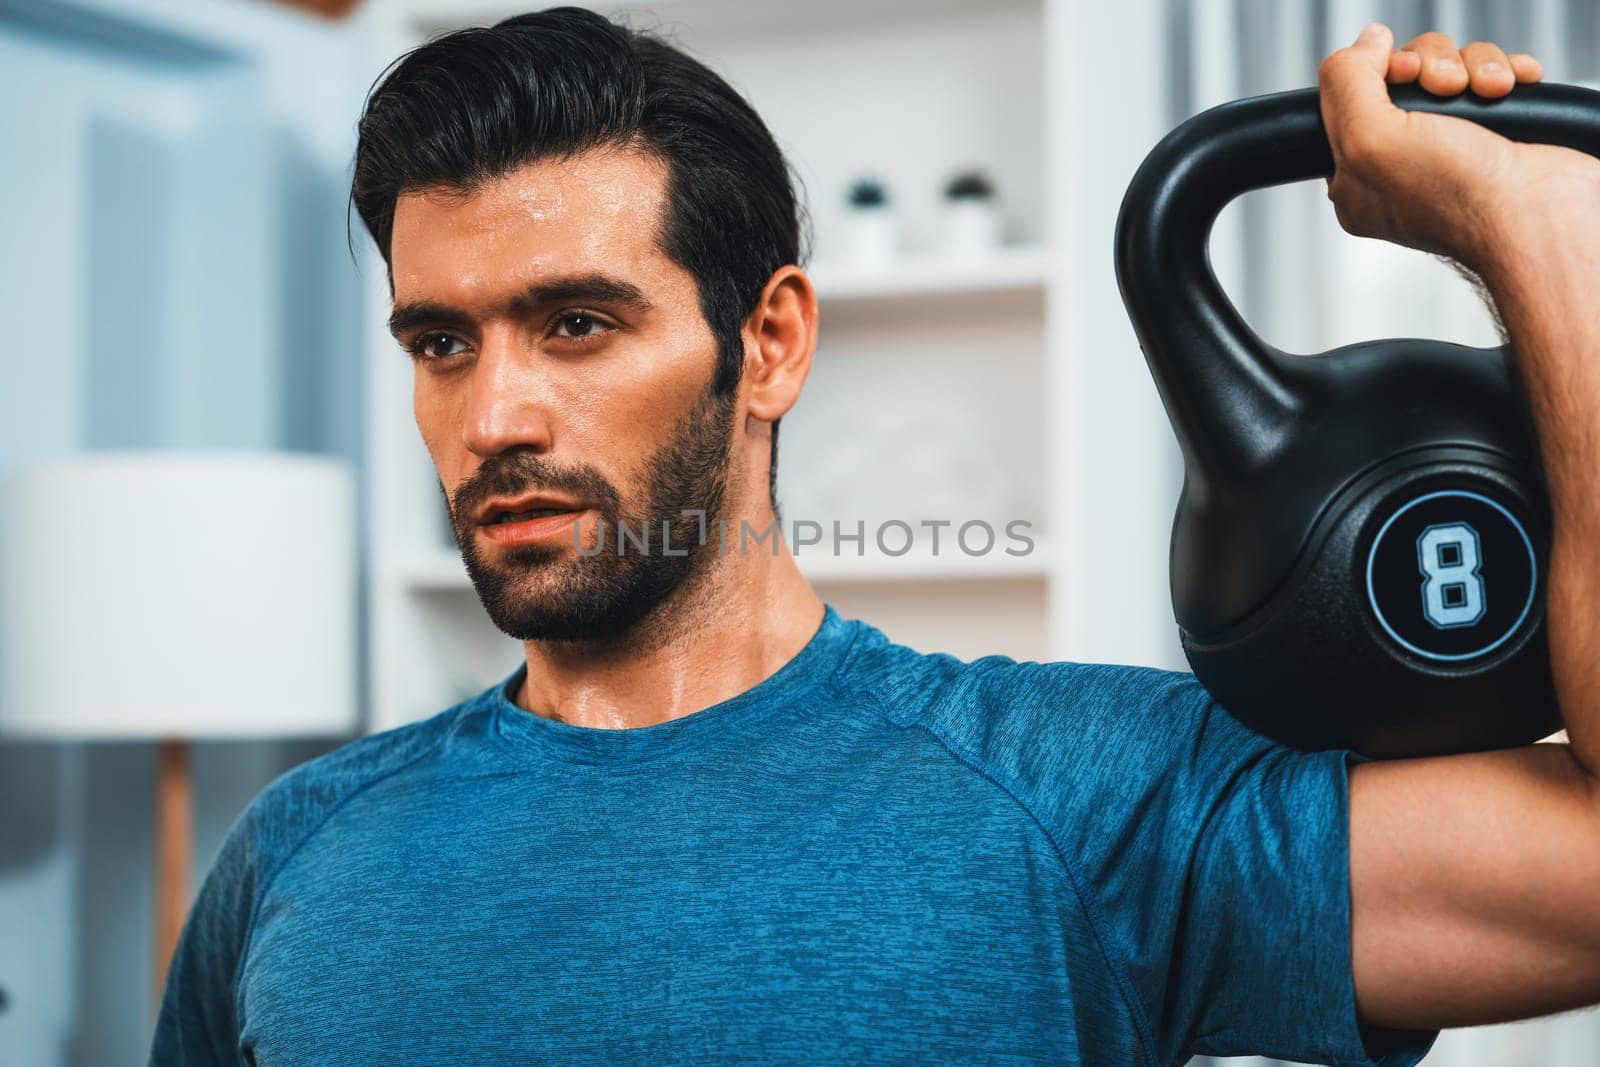 Athletic body and active sporty man lifting kettlebell weight for effective targeting muscle gain at gaiety home as concept of healthy fit body home workout lifestyle.